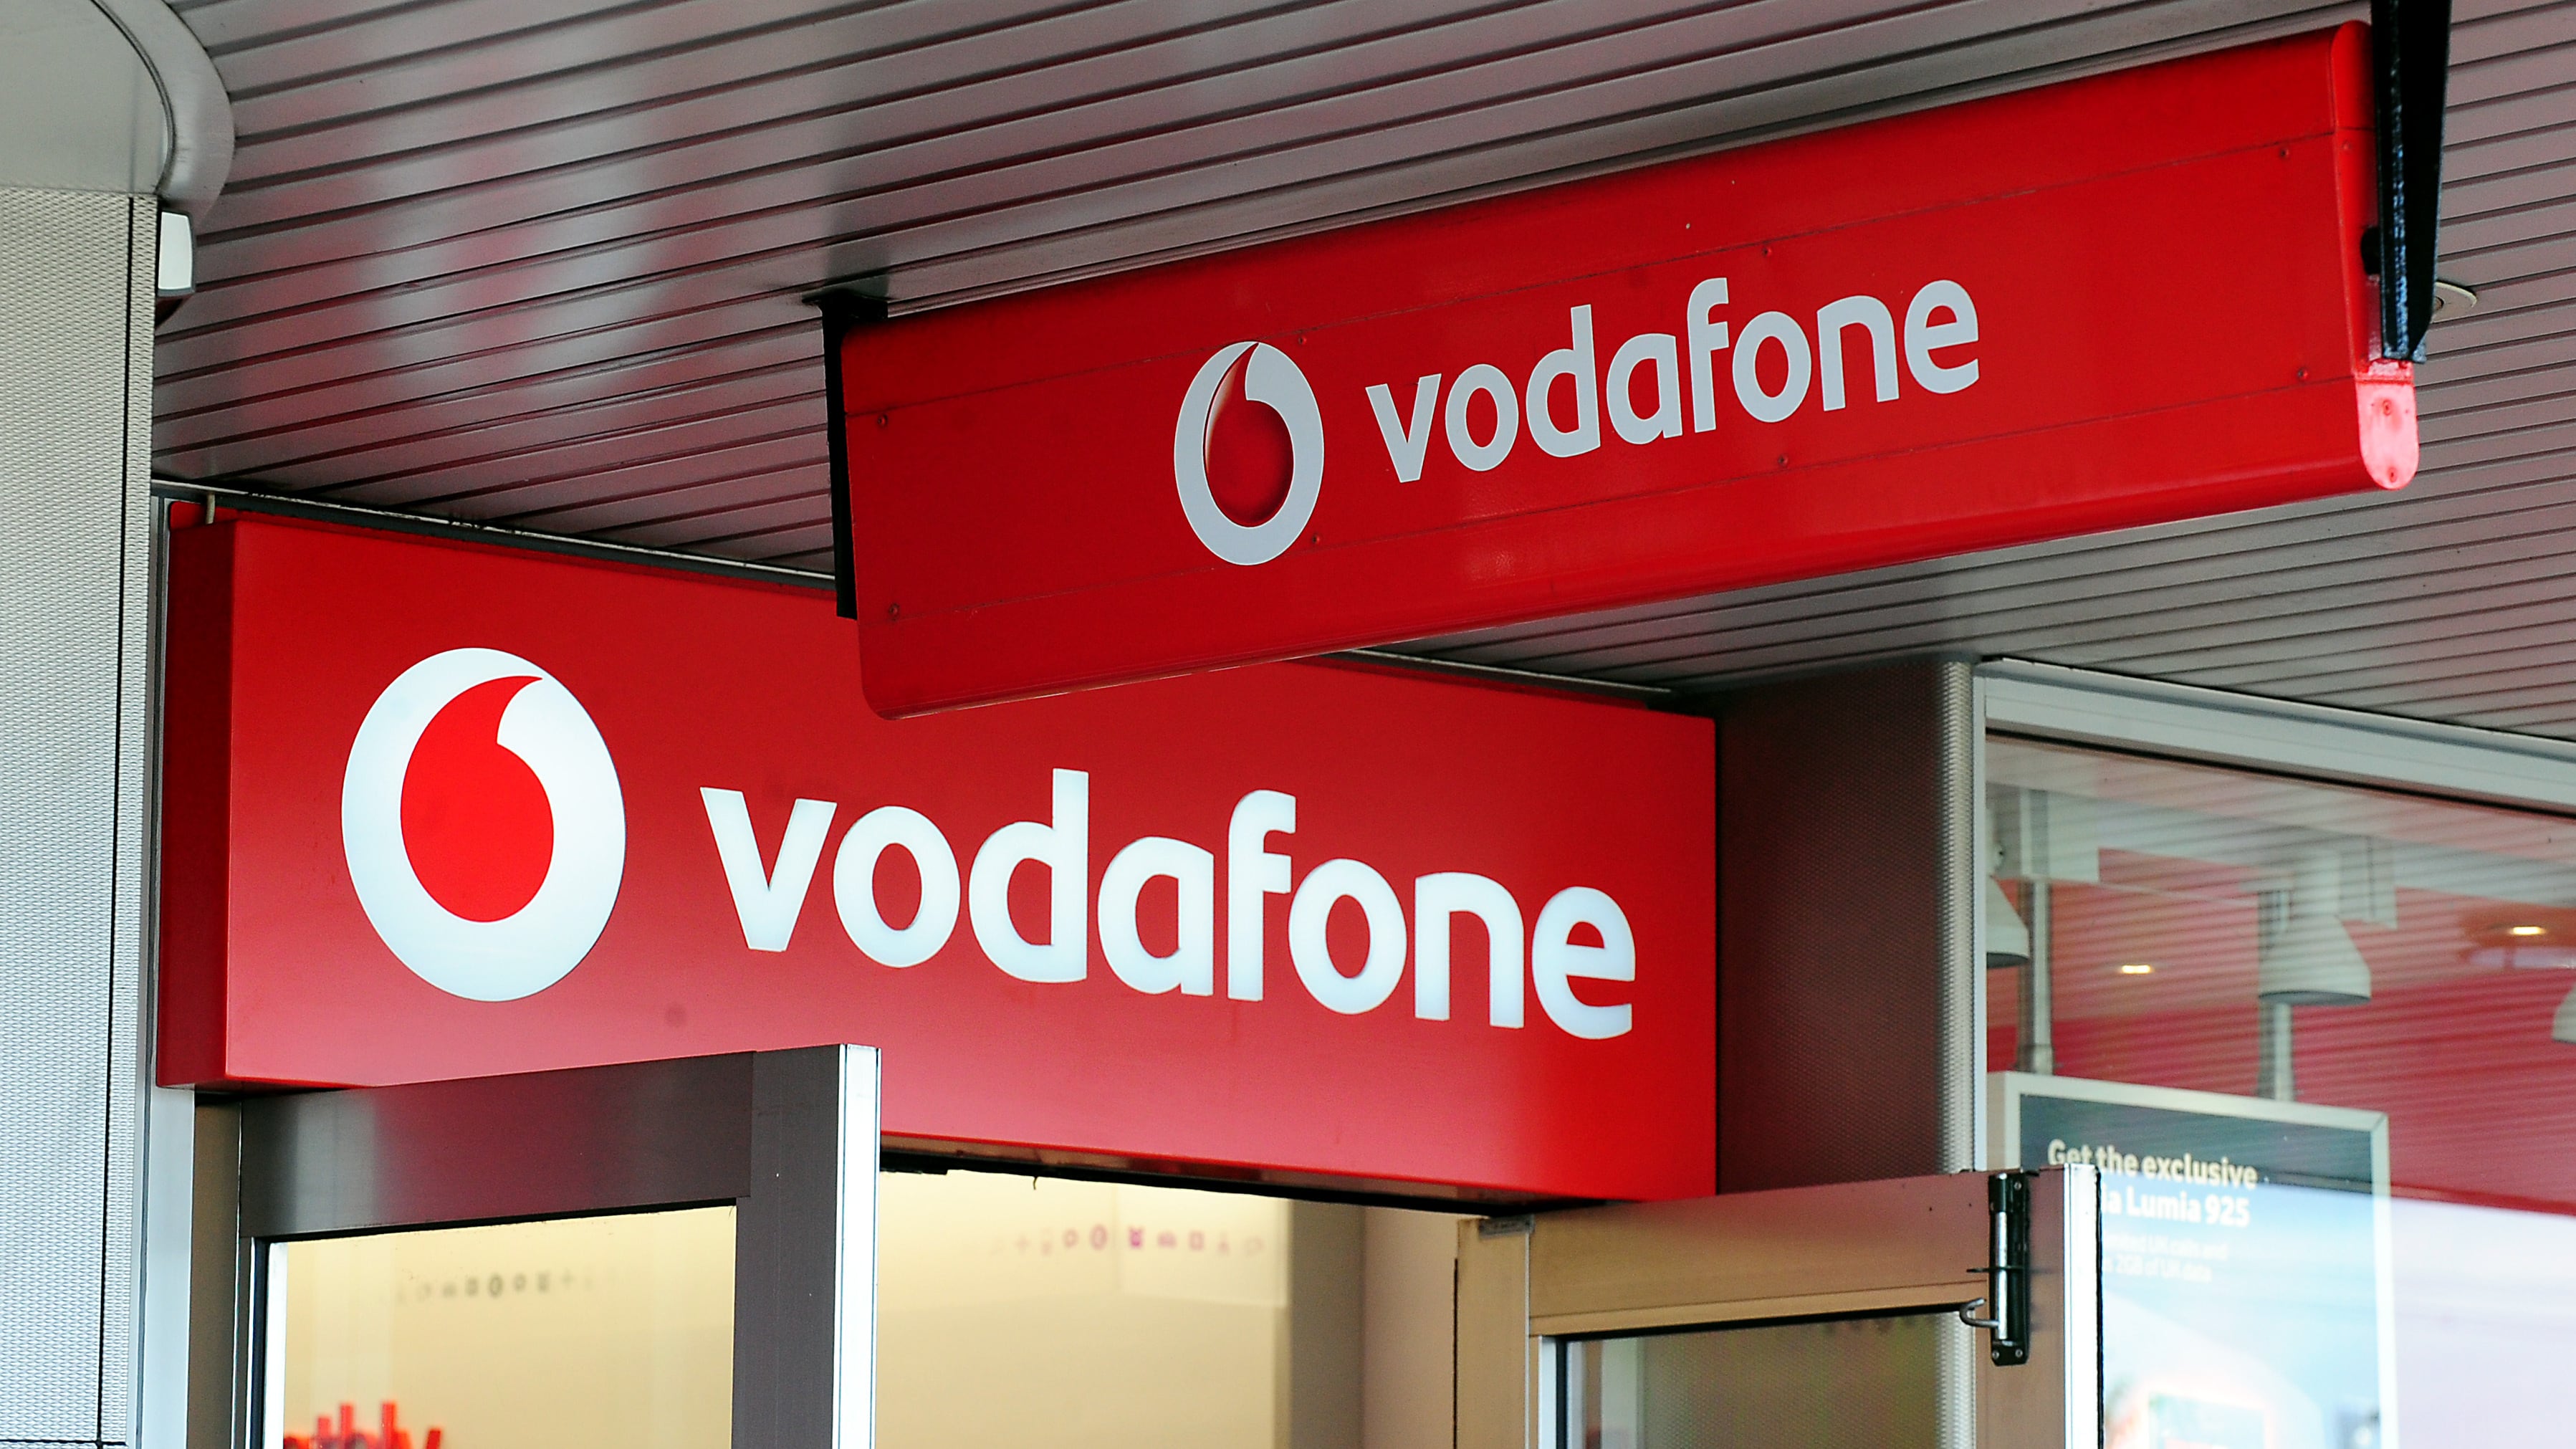 Vodafone’s plan to merge with Three could face an in-depth investigation, the competition watchdog has said